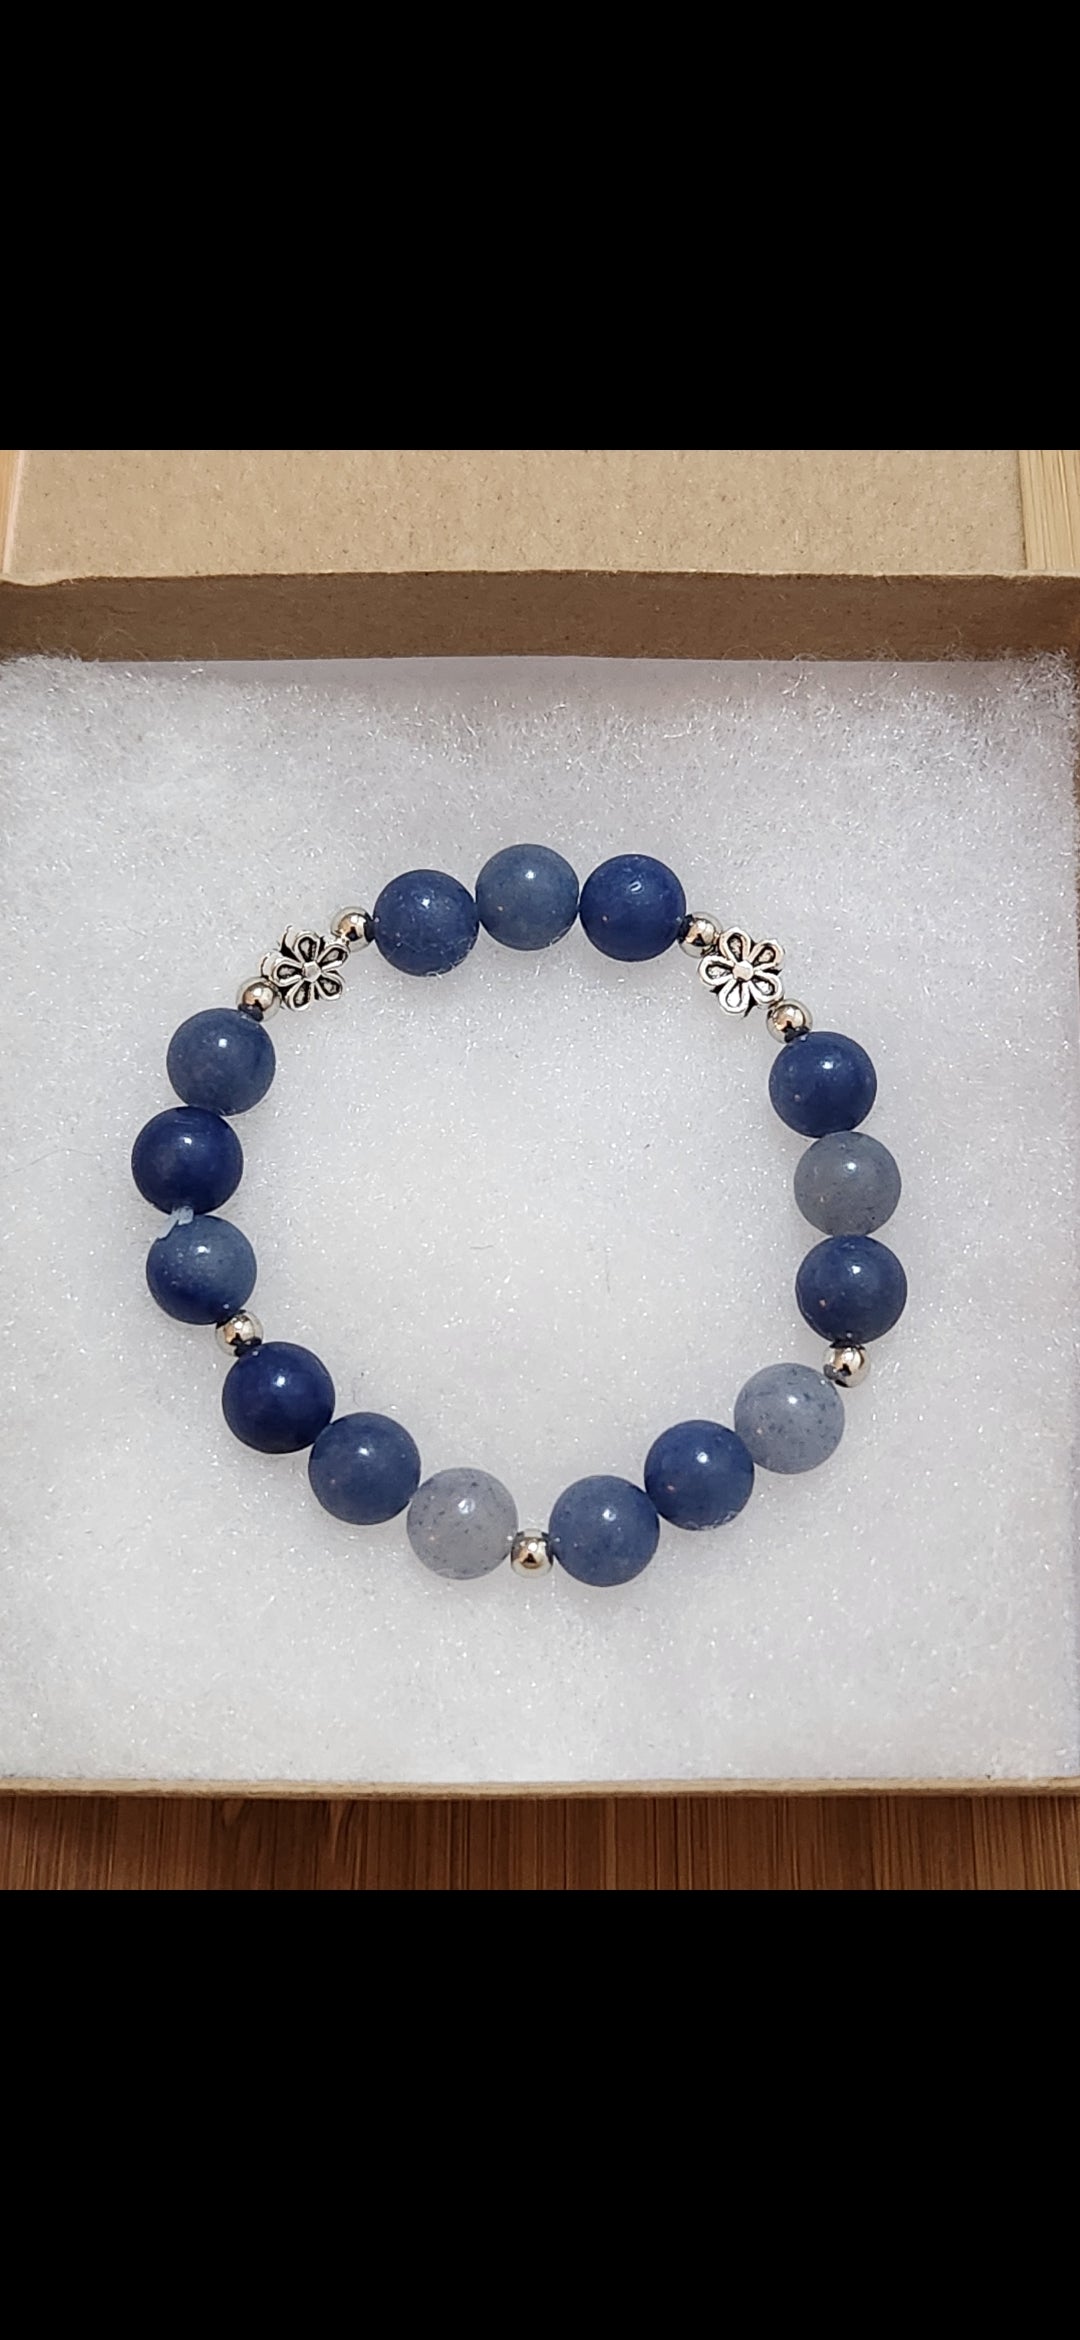 Blue Aventurine Stone beaded bracelet with silver flower accents - positivity - tranquility - communication